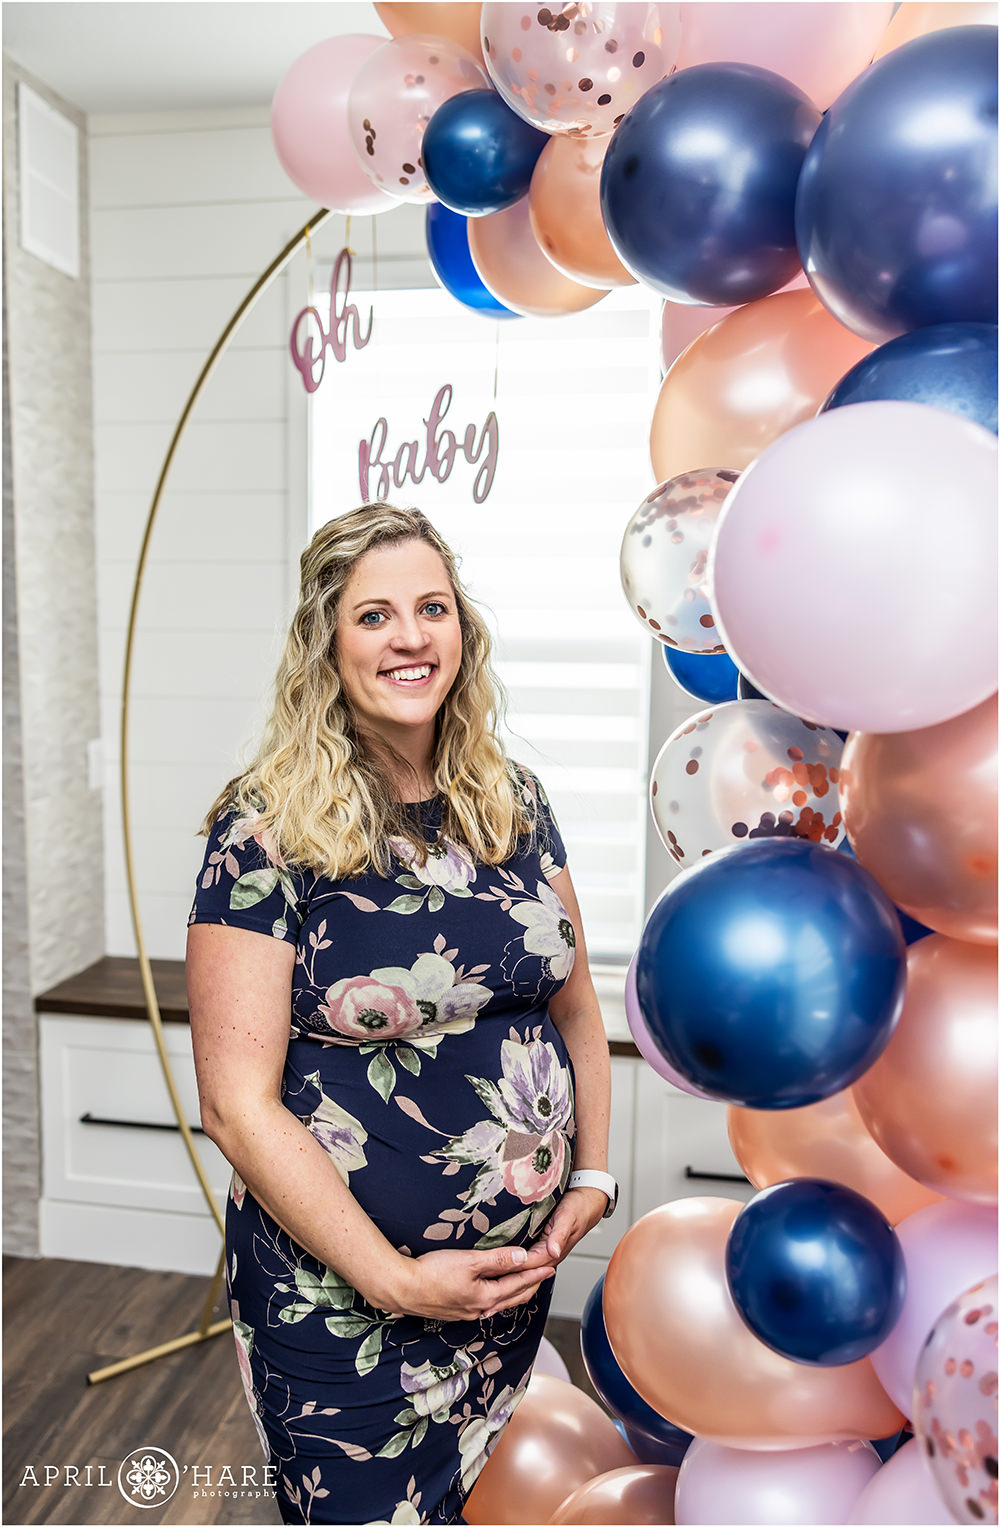 Colorado baby shower photographer photographs a mama to be wearing a blue and pink floral dress at her blue and pink themed baby shower as she stands in front of her cute blue and pink balloon arch